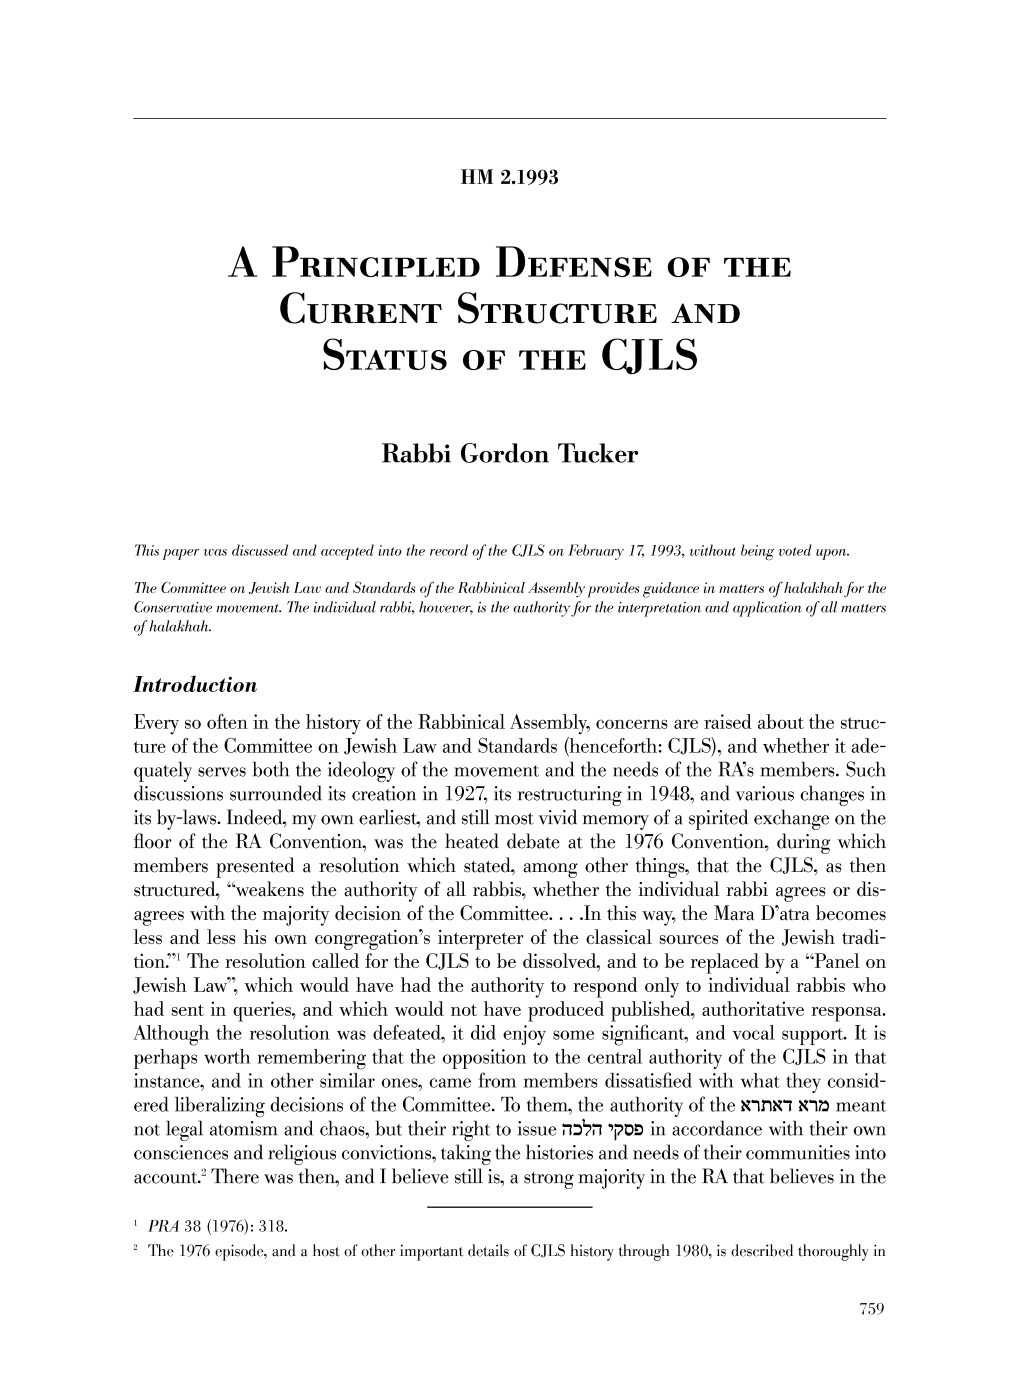 A PRINCIPLED DEFENSE of the Current STRUCTURE and STATUS of the CJLS